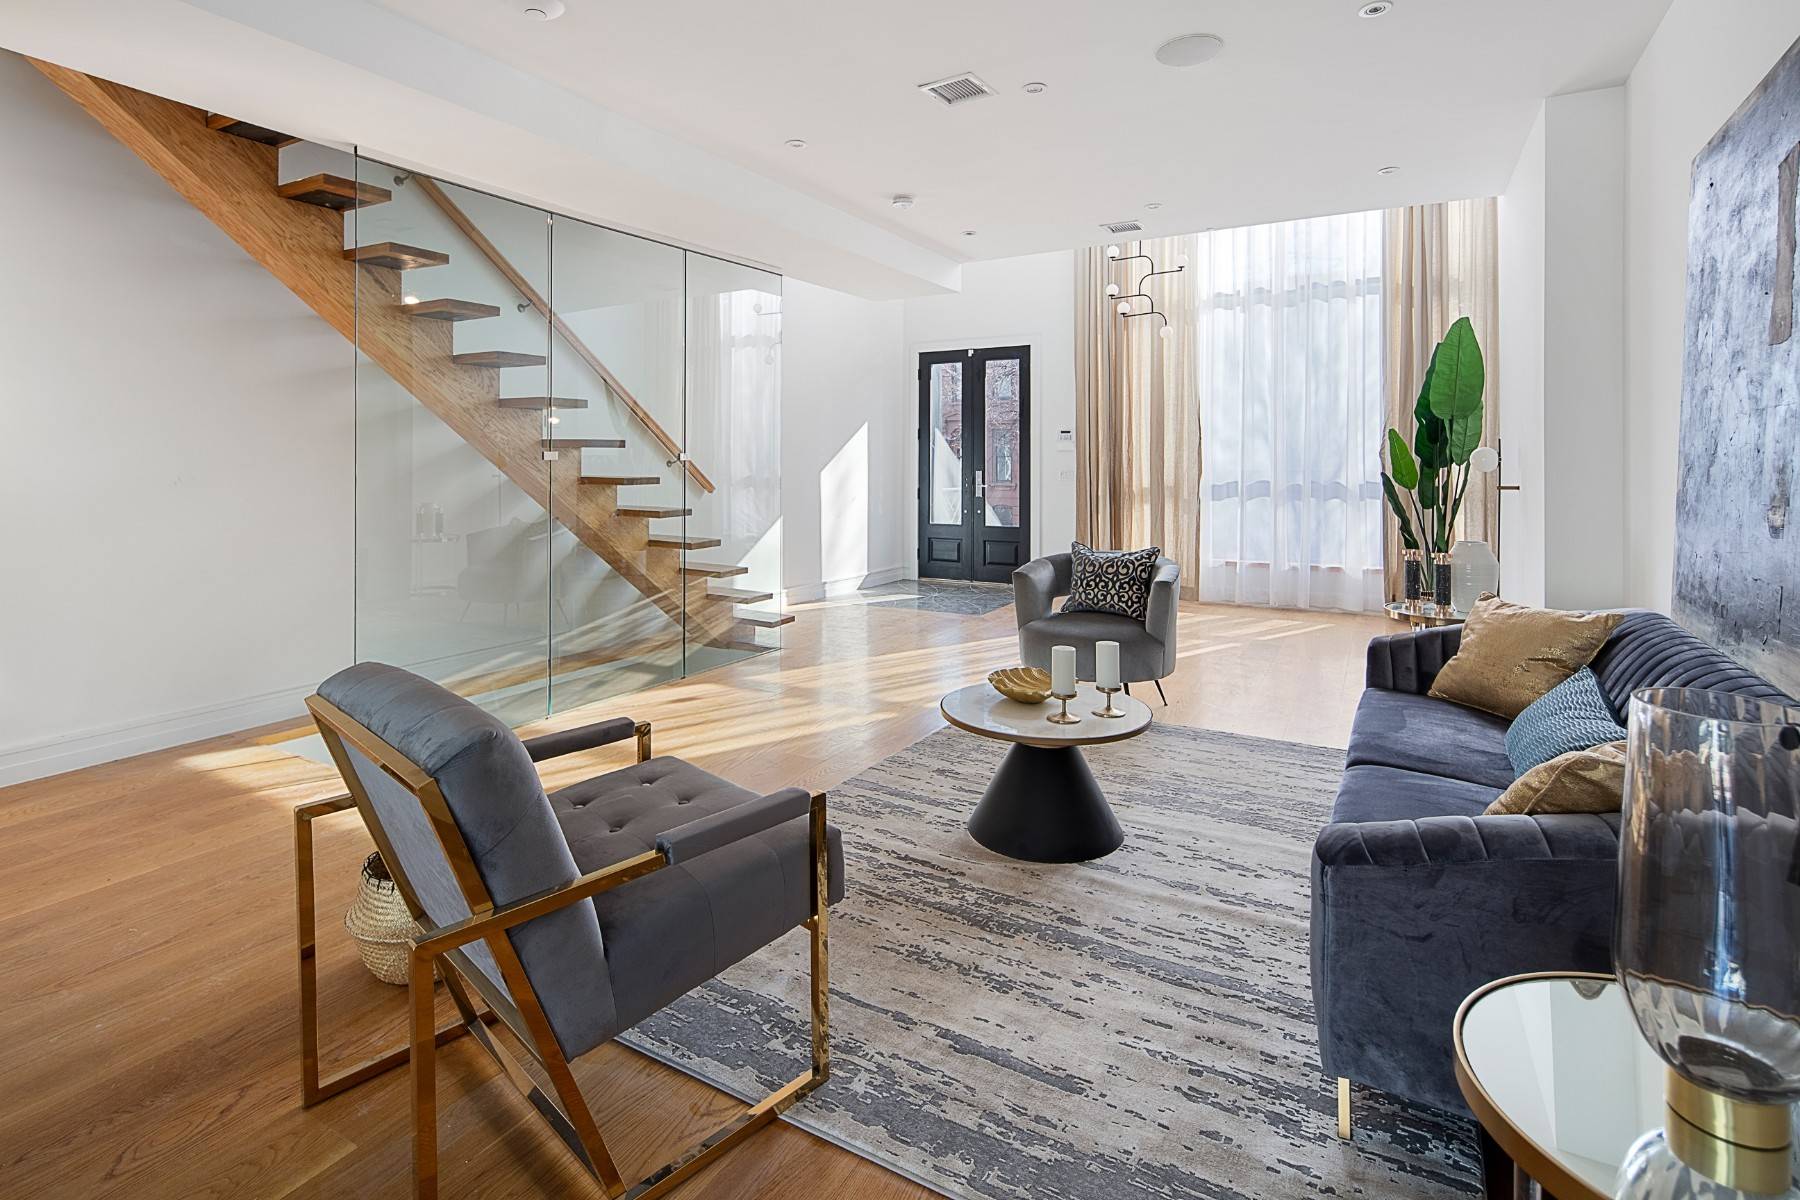 This gorgeous brand new townhouse is distinctive in its contemporary Brooklyn design.